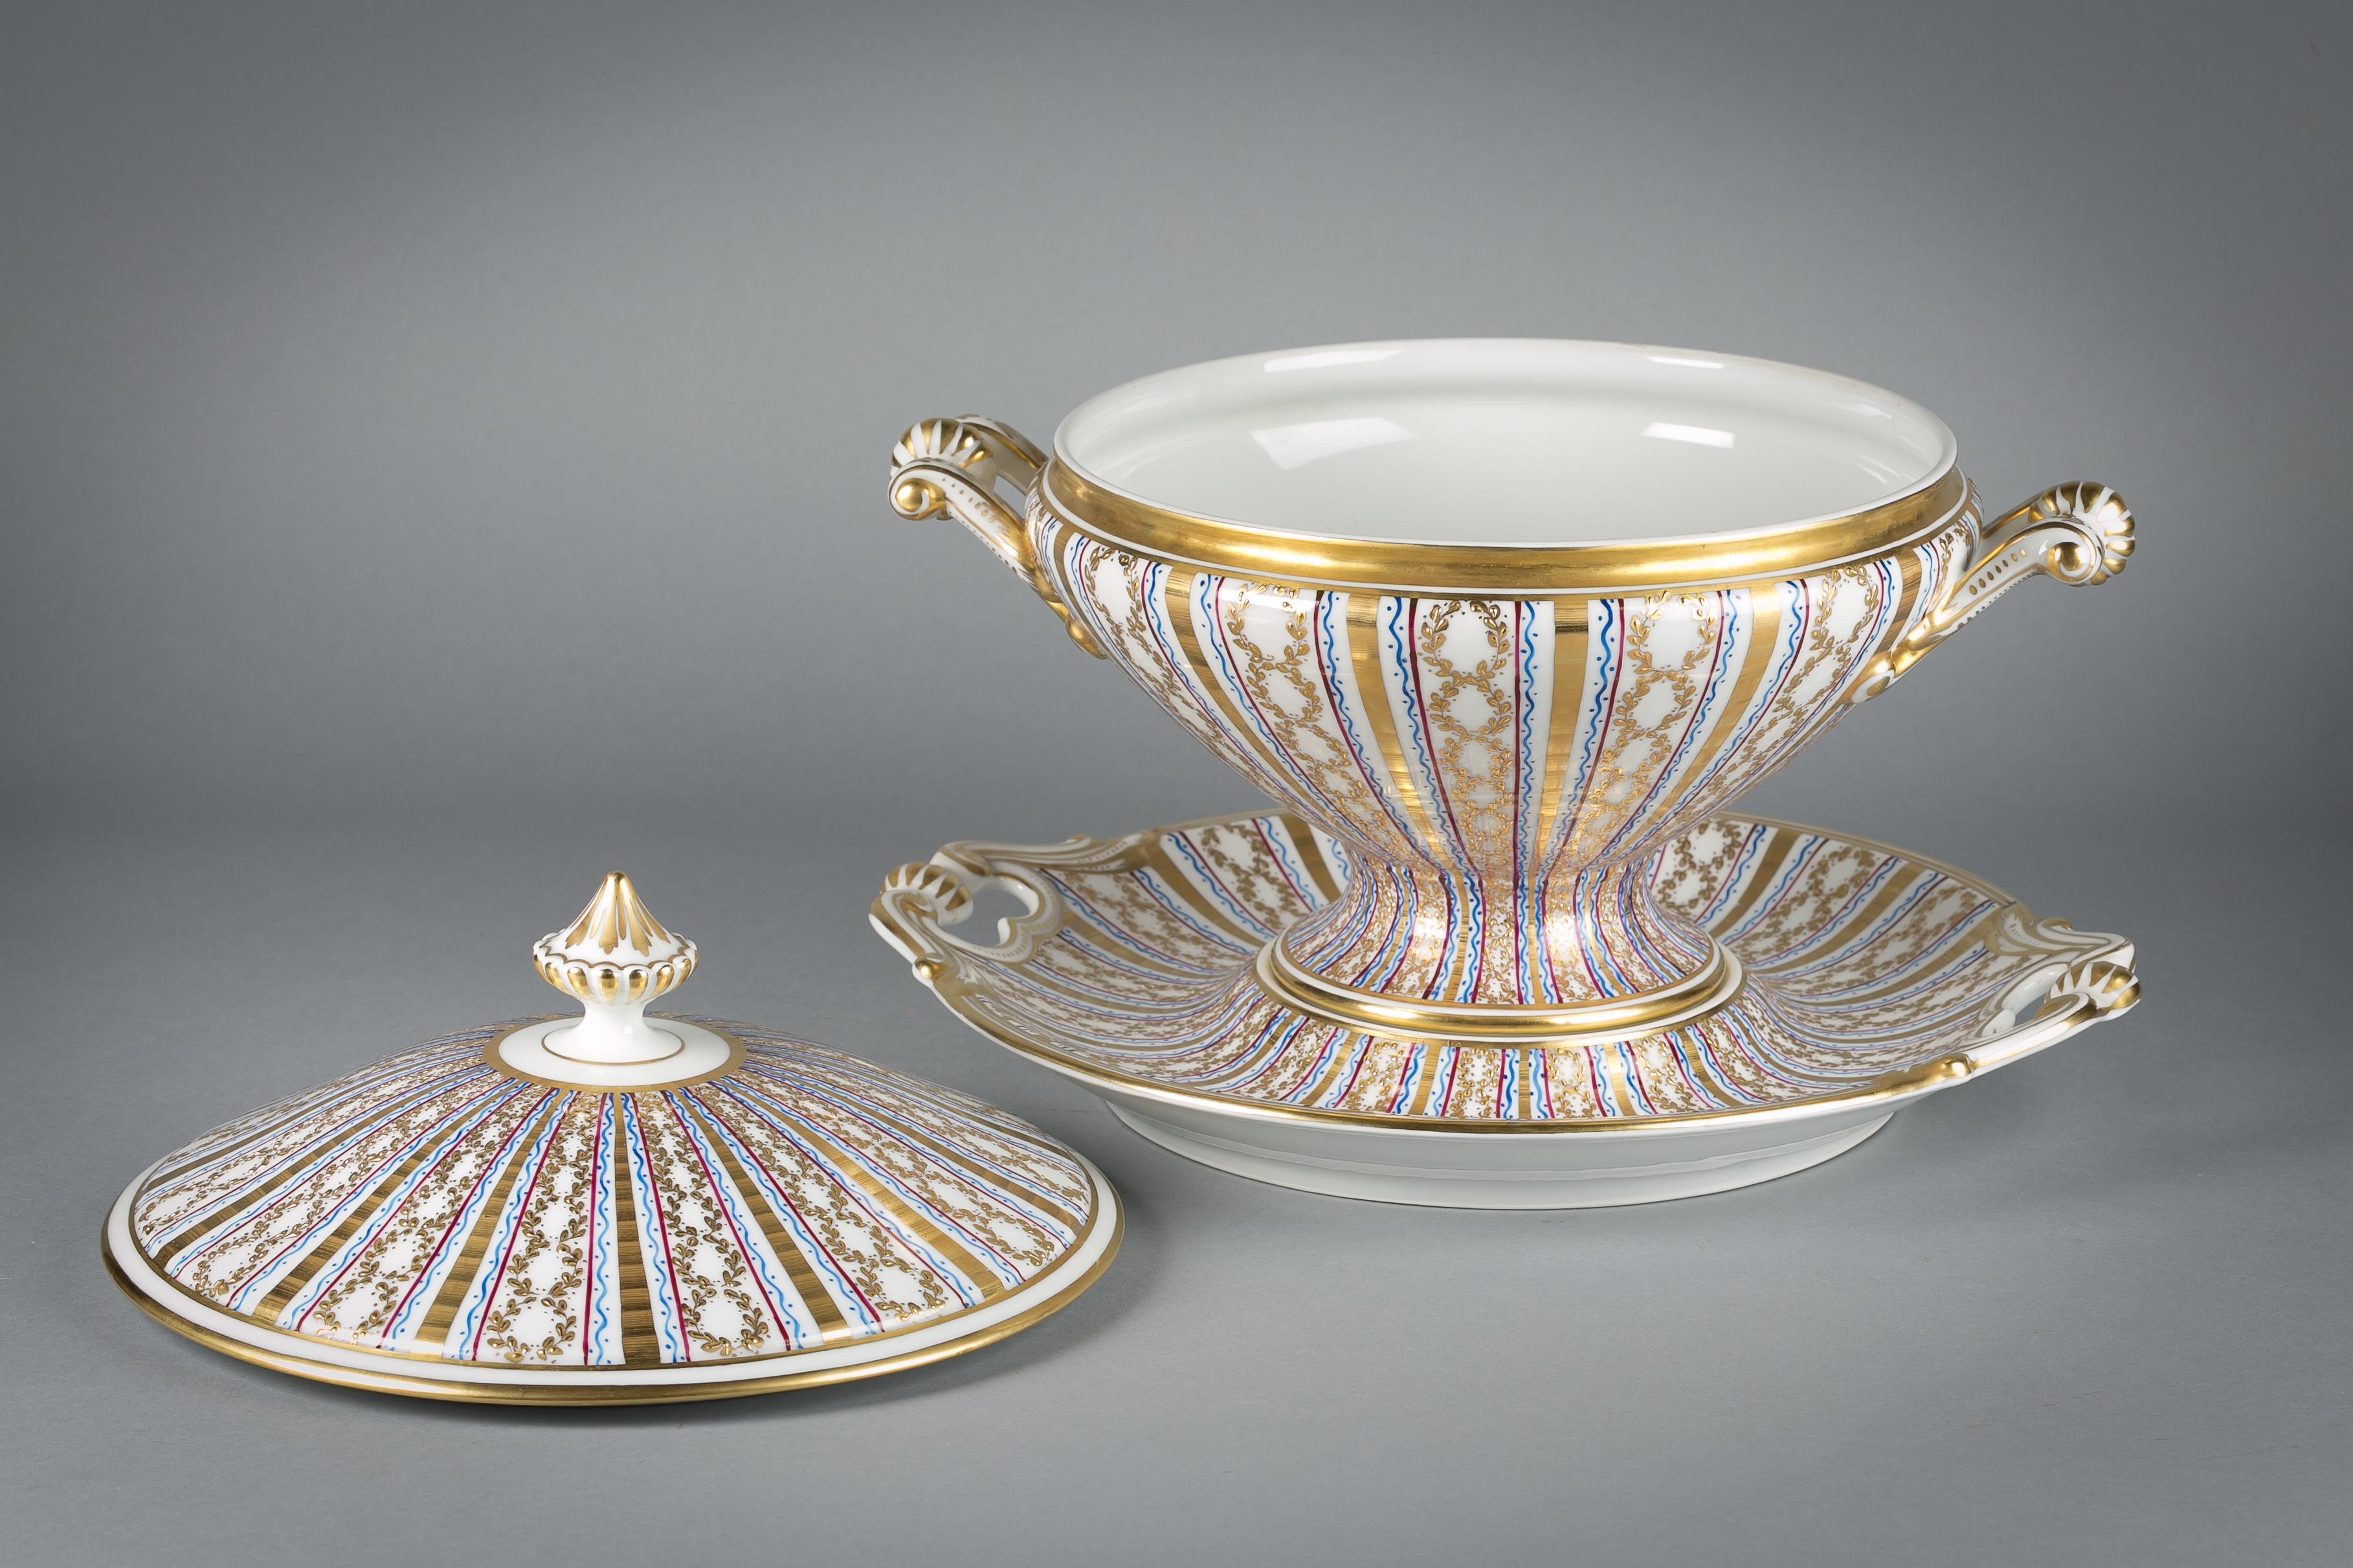 Paris porcelain covered tureen on stand, Le Tallec, dated 1959. Made for Tiffany & Co.